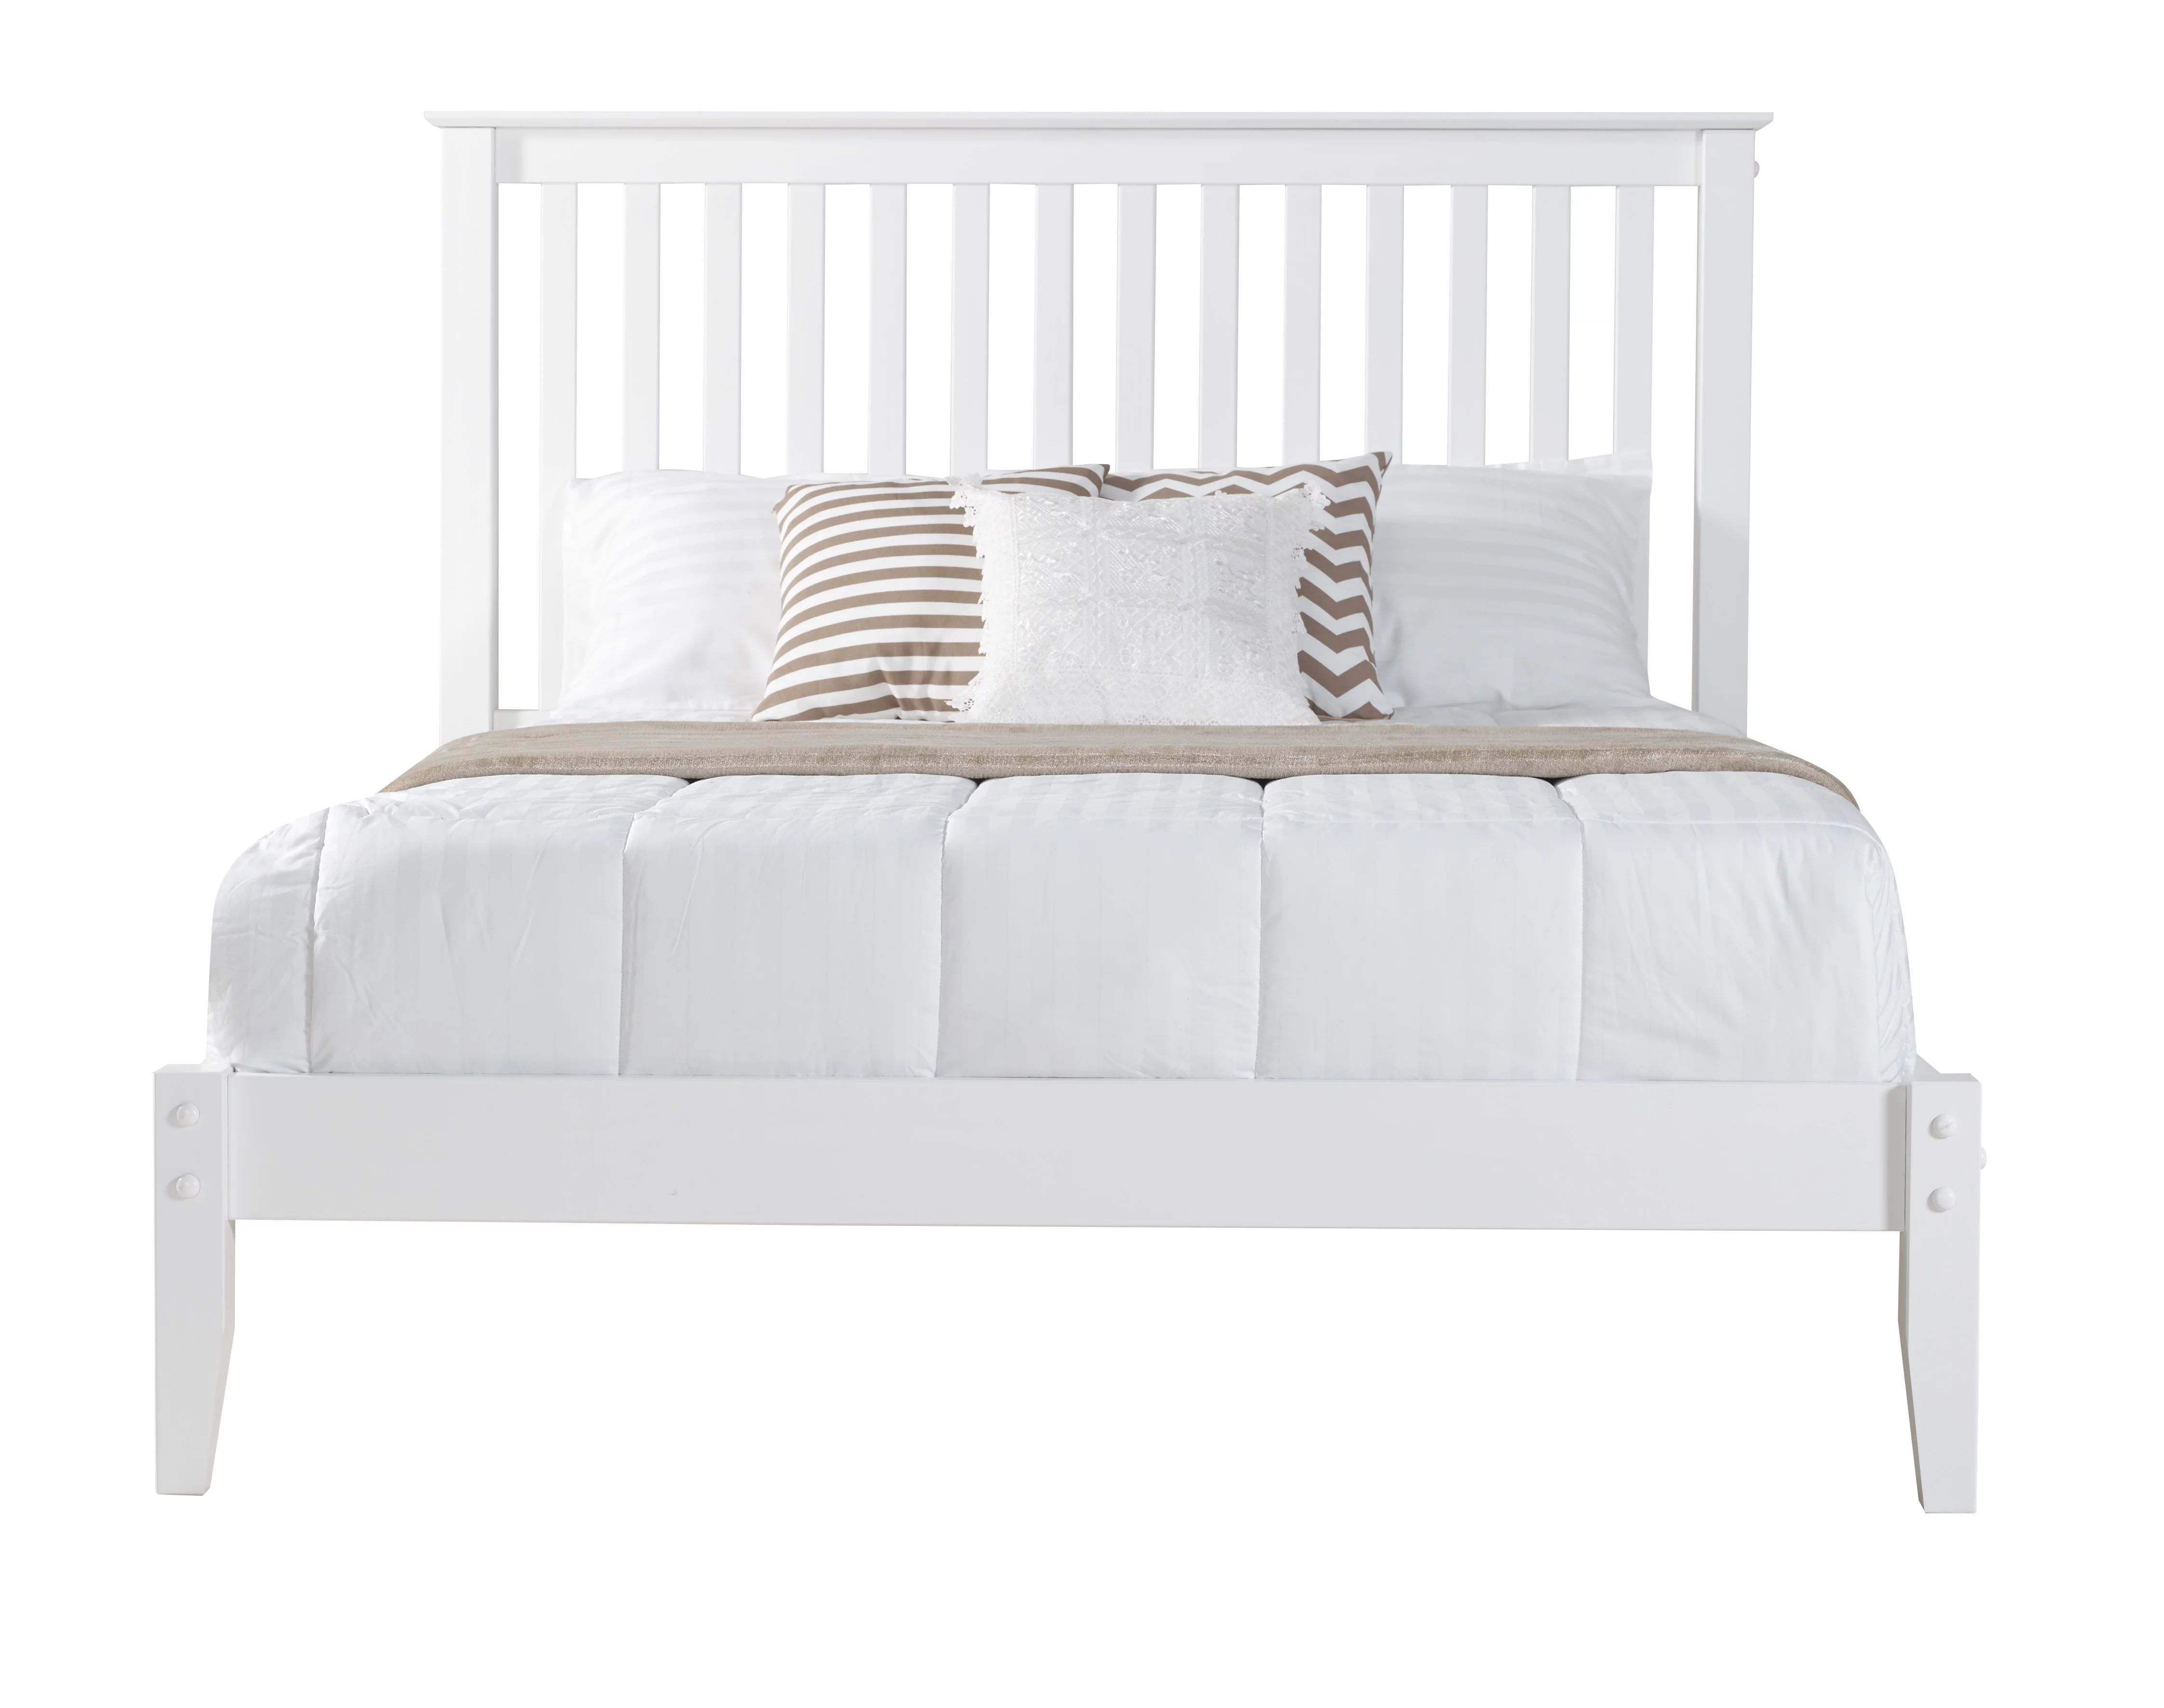 Mission Style Queen Size Platform Bed - White Finish | Walmart (US)